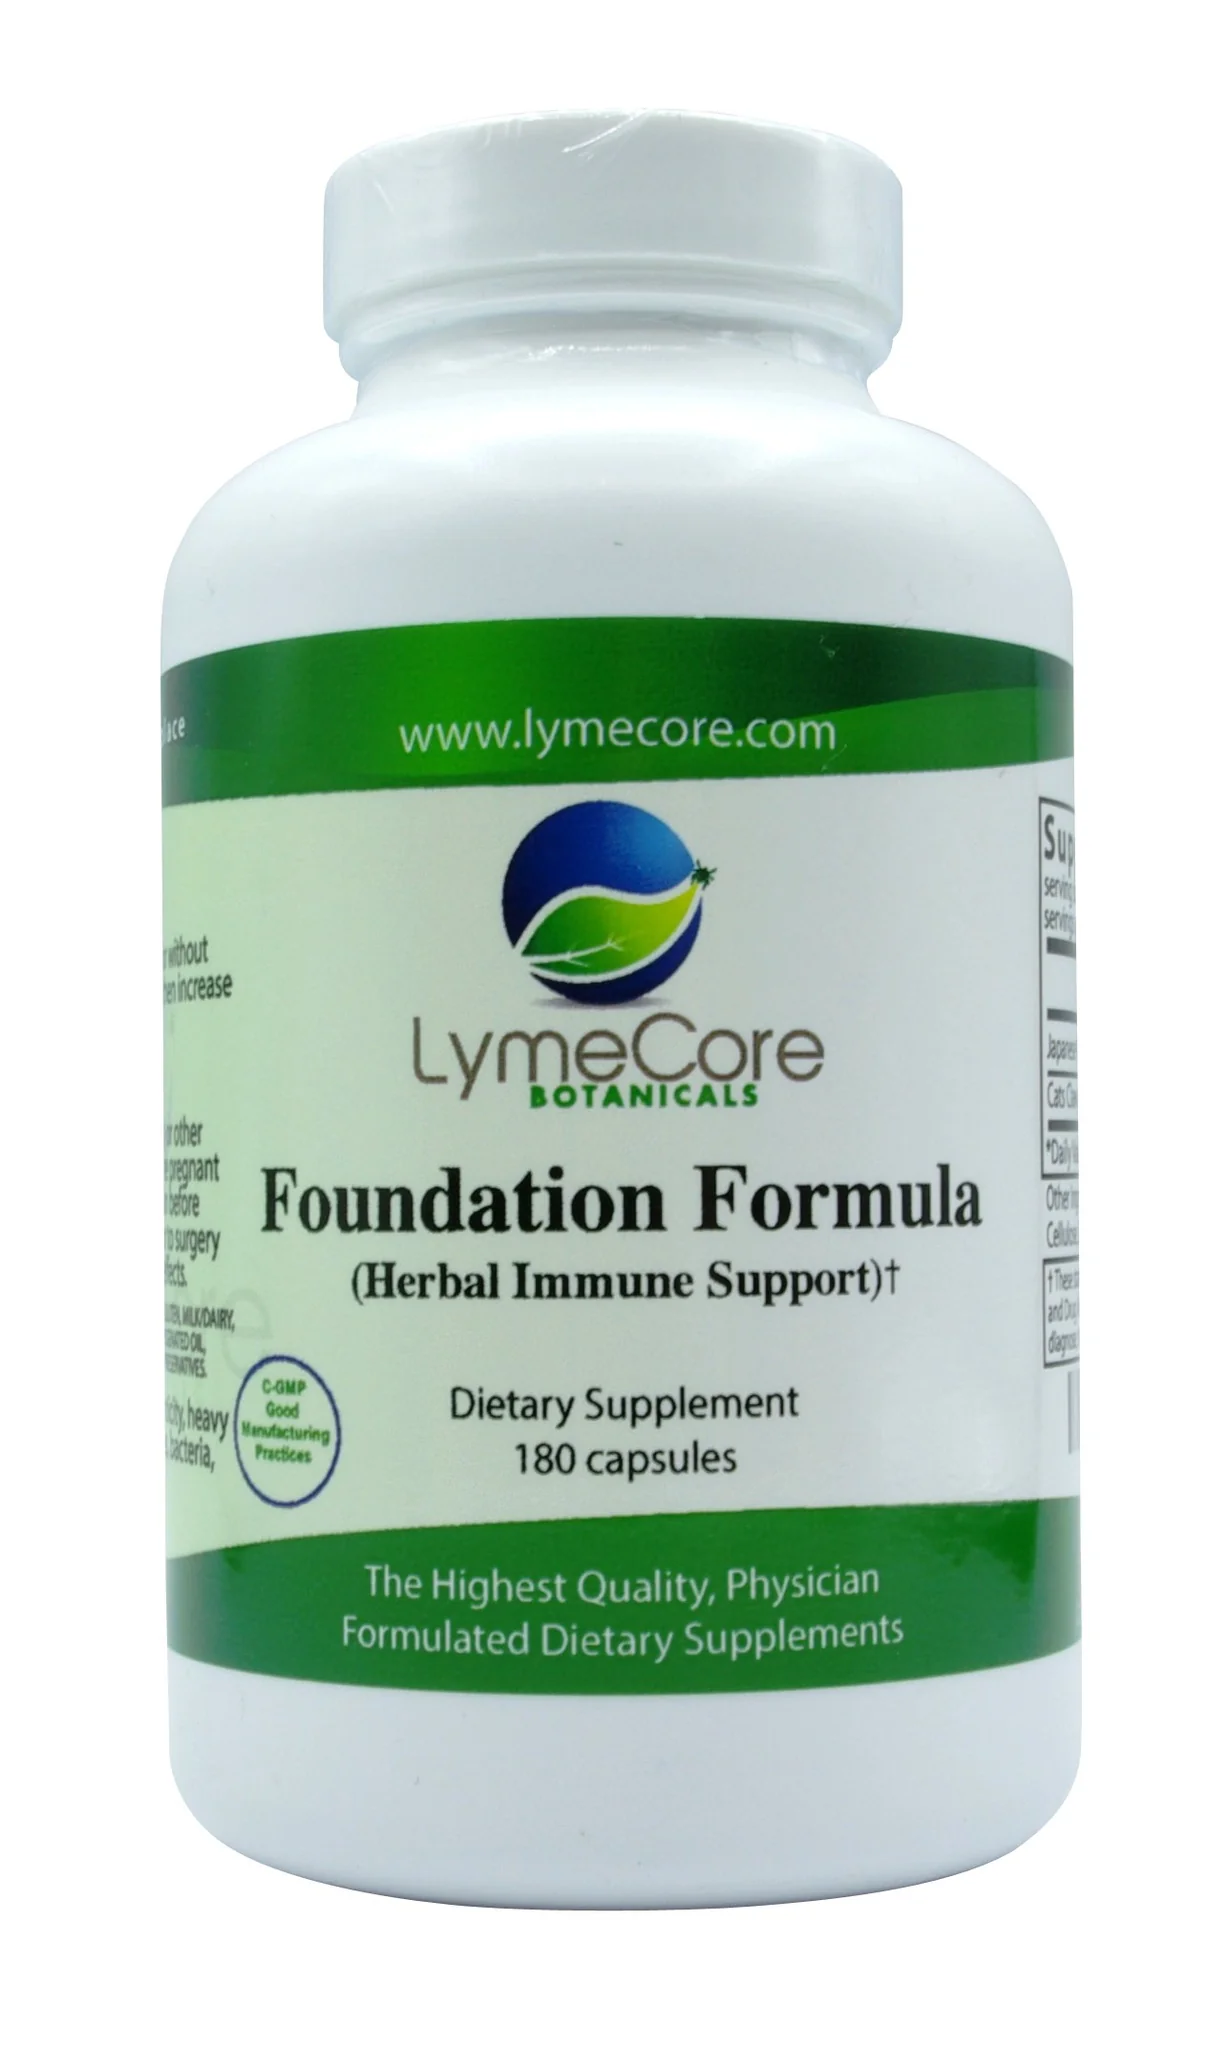 Dr. Tom recommends Foundational Formula herbal immune support by LymeCore Botanicals